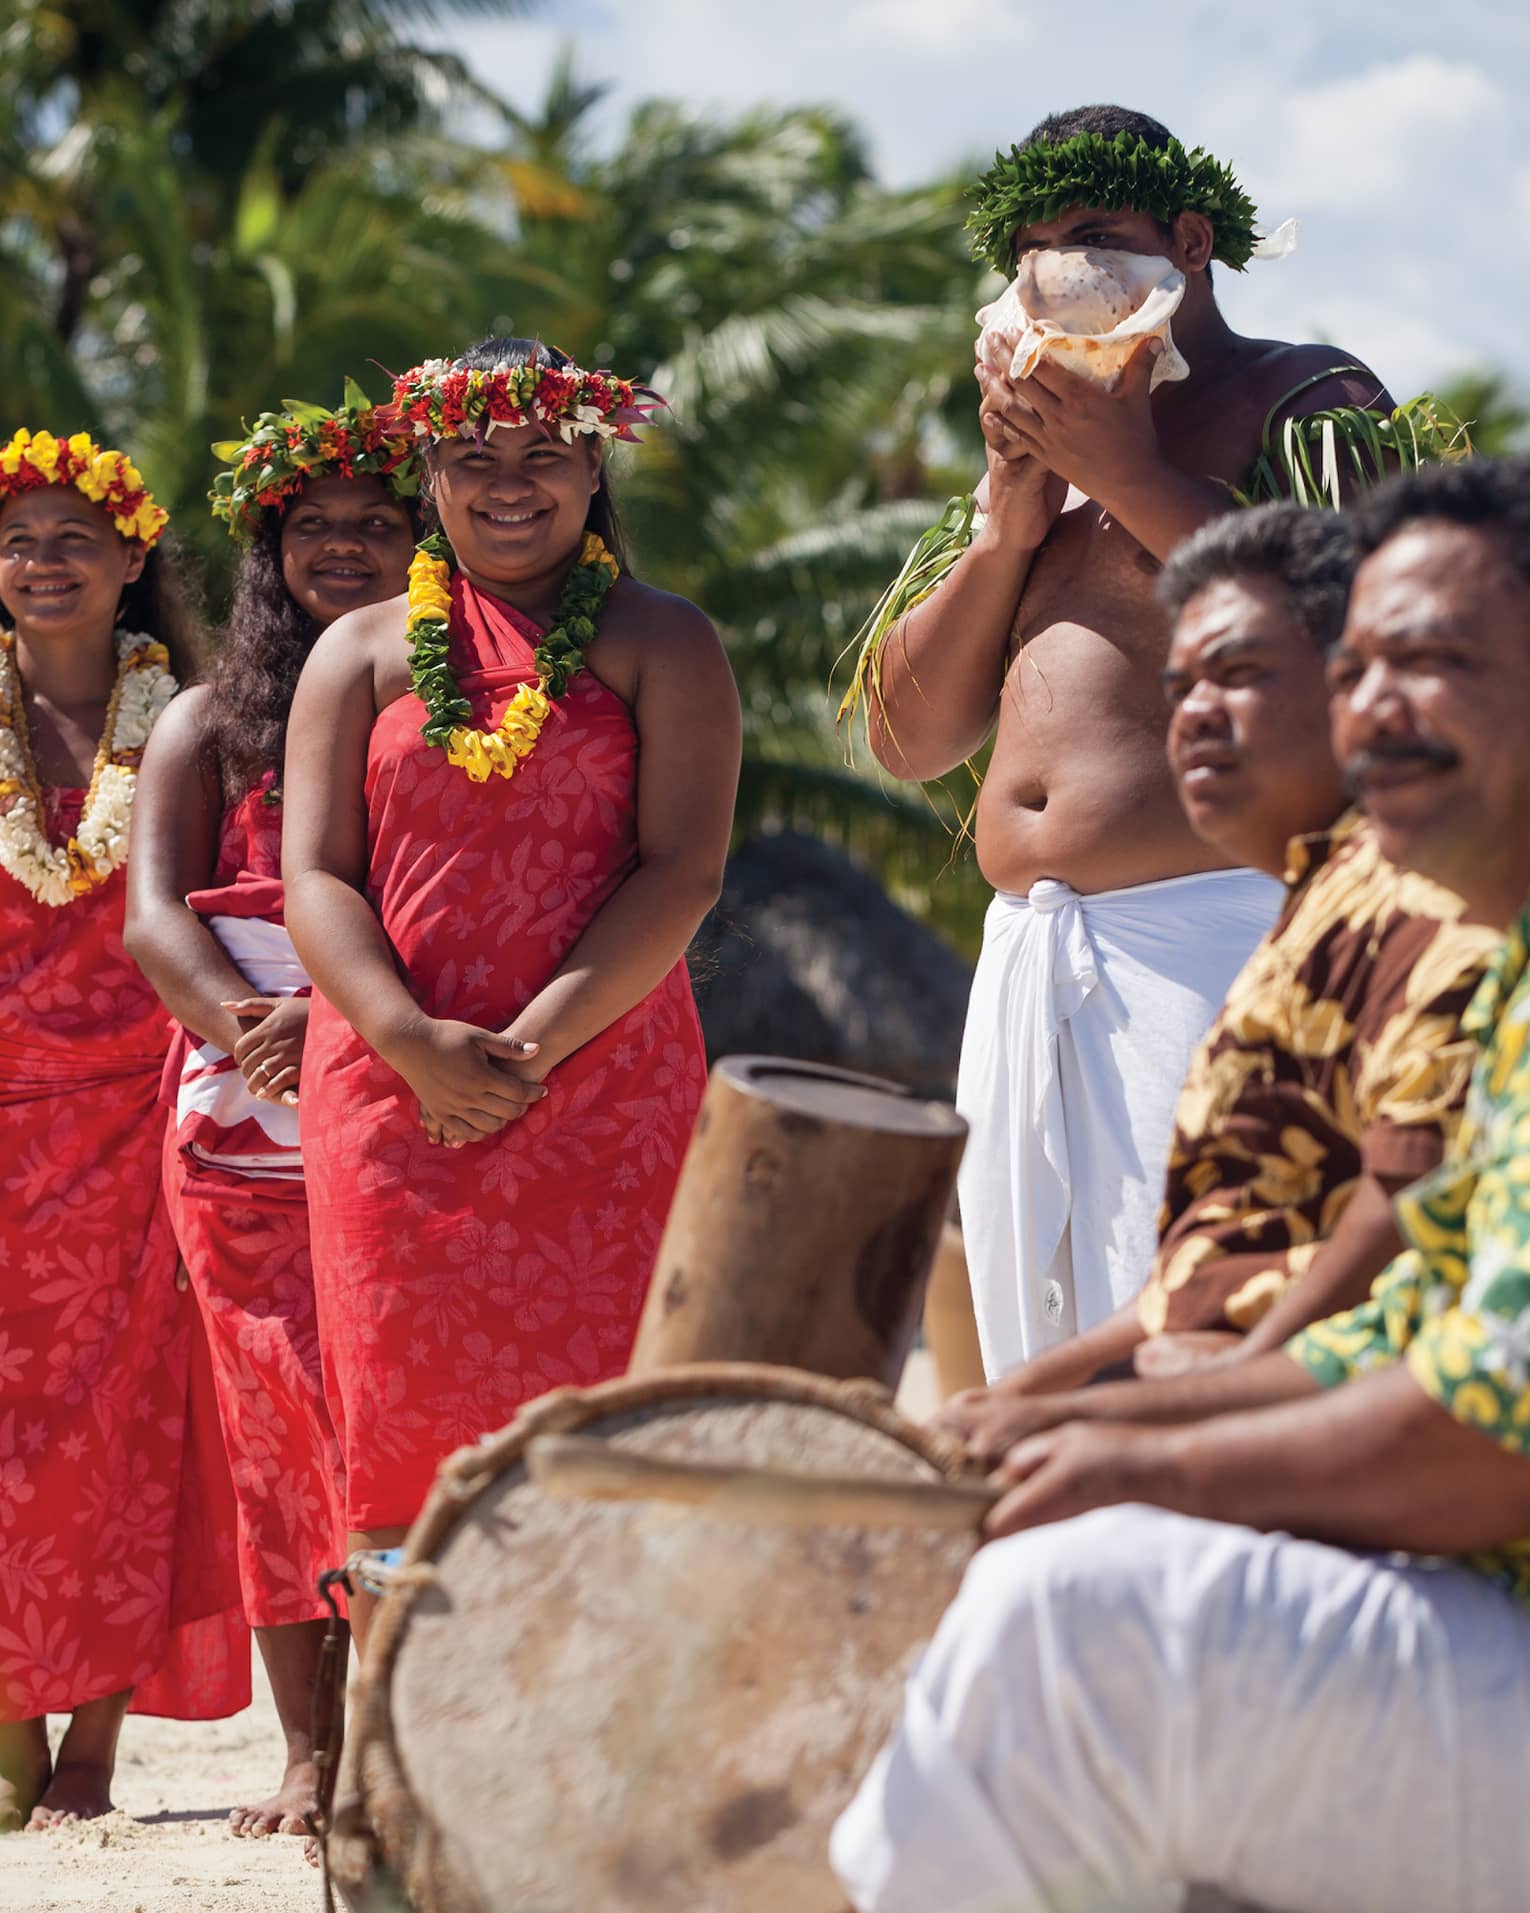 Polynesian wedding ceremony, guests wearing traditional clothing, man with shell